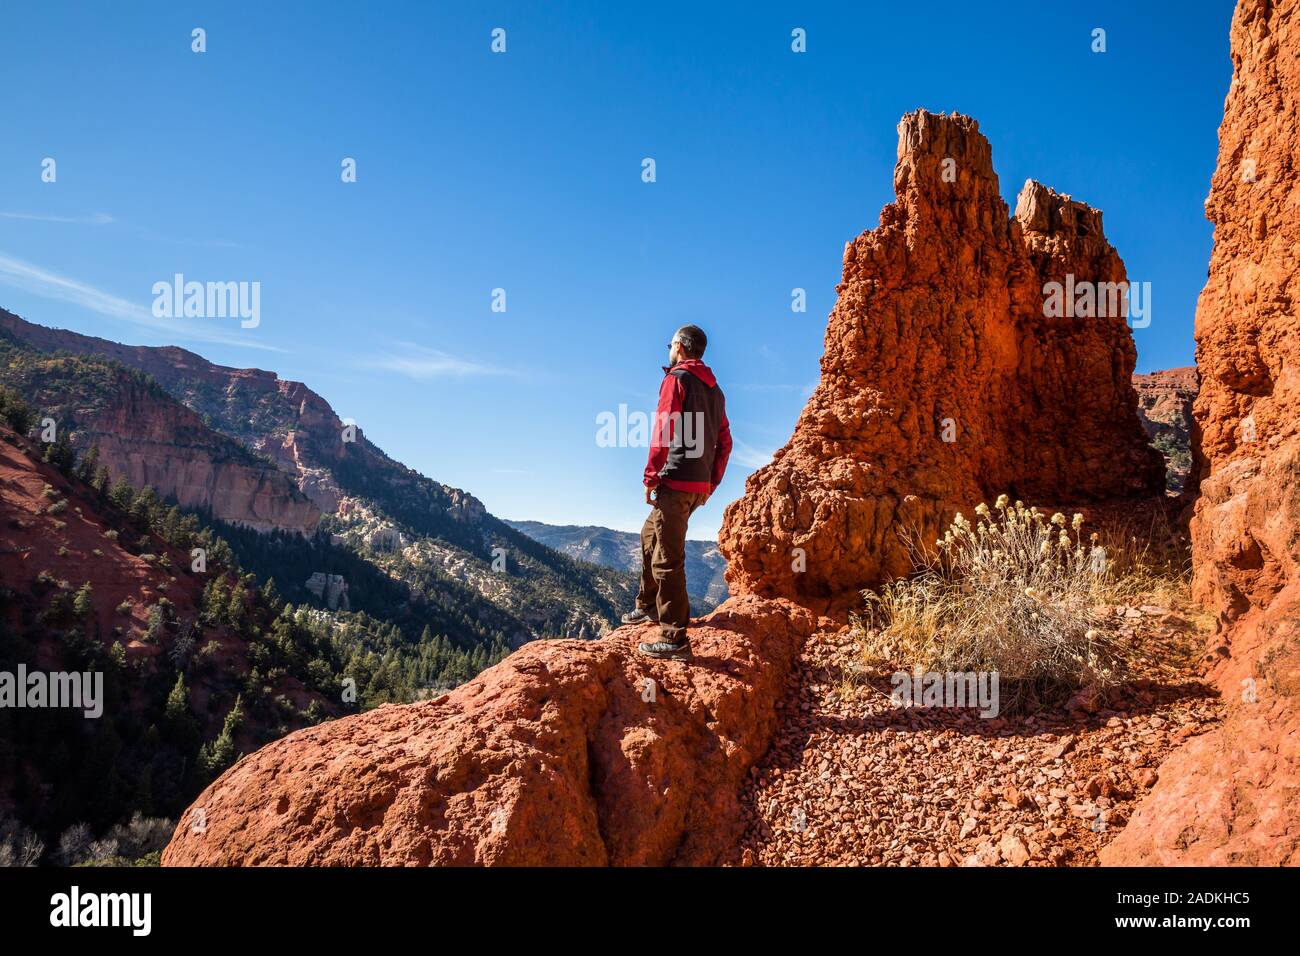 Young man standing atop a red rock tower over a cliff in Southern Utah admiring the view. Stock Photo